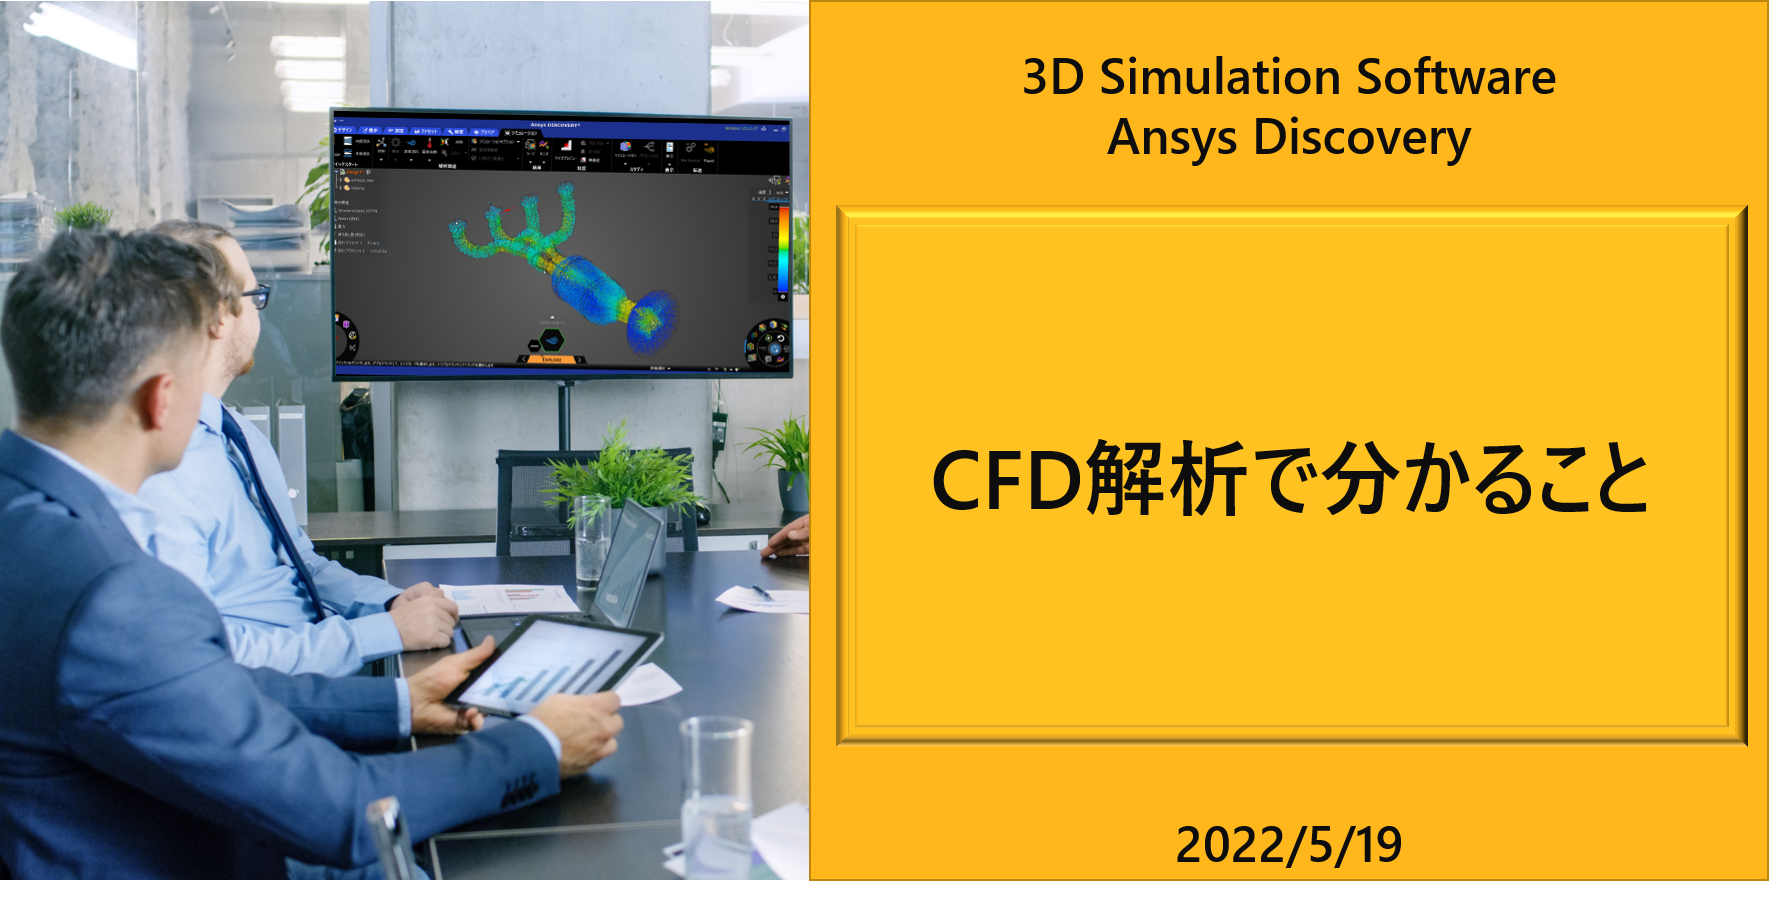 Ansys Discovery】CFD解析で分かること・力【流体解析編】｜技術ブログ